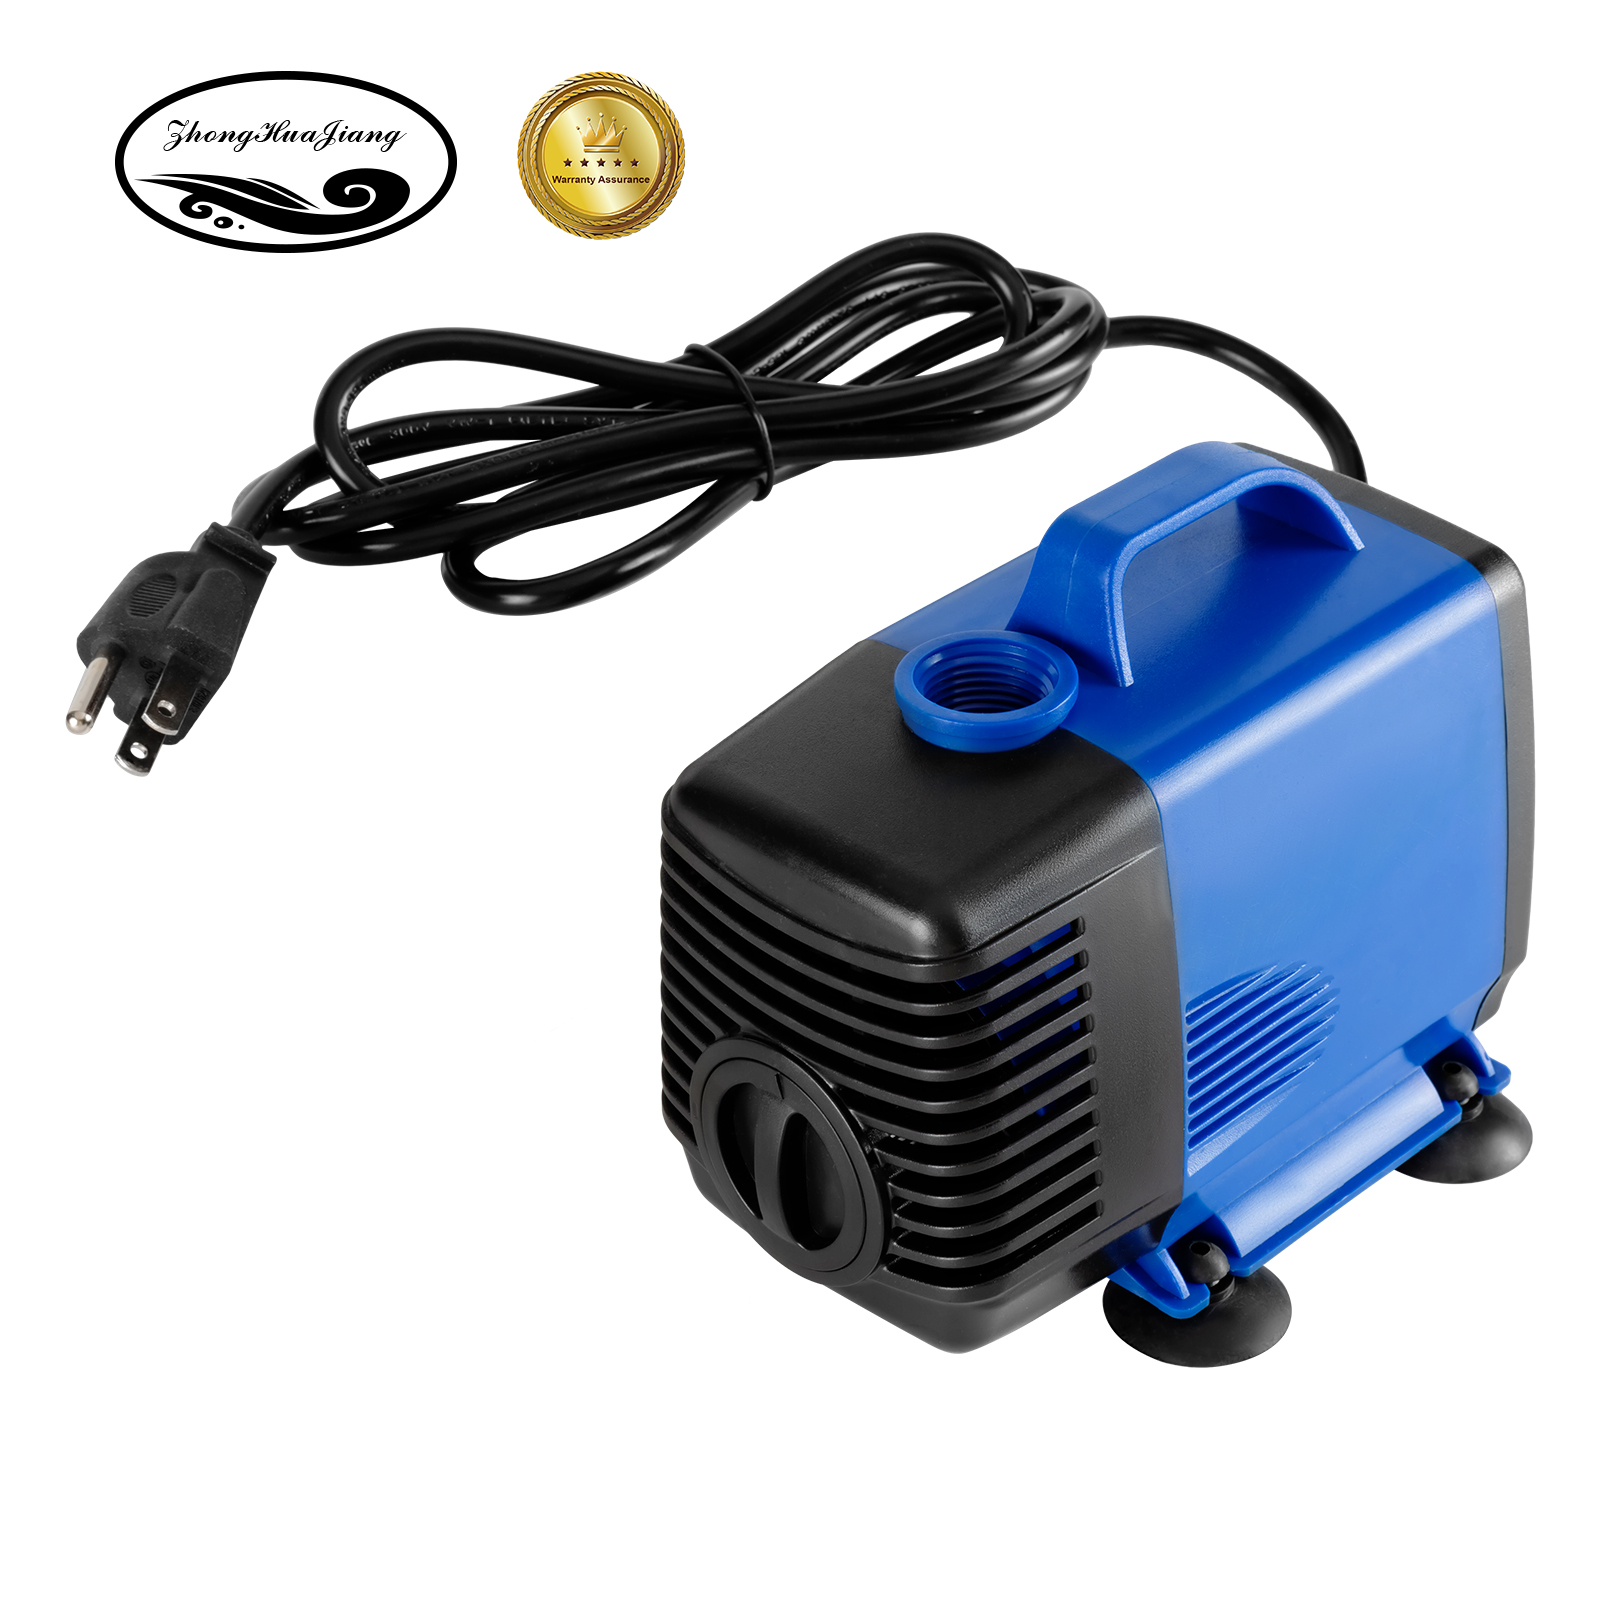 110V 60hz 80W Electric Submersible Pump Spindle Motor cnc spindle cnc motor Cooling Water Pump for CNC router machine